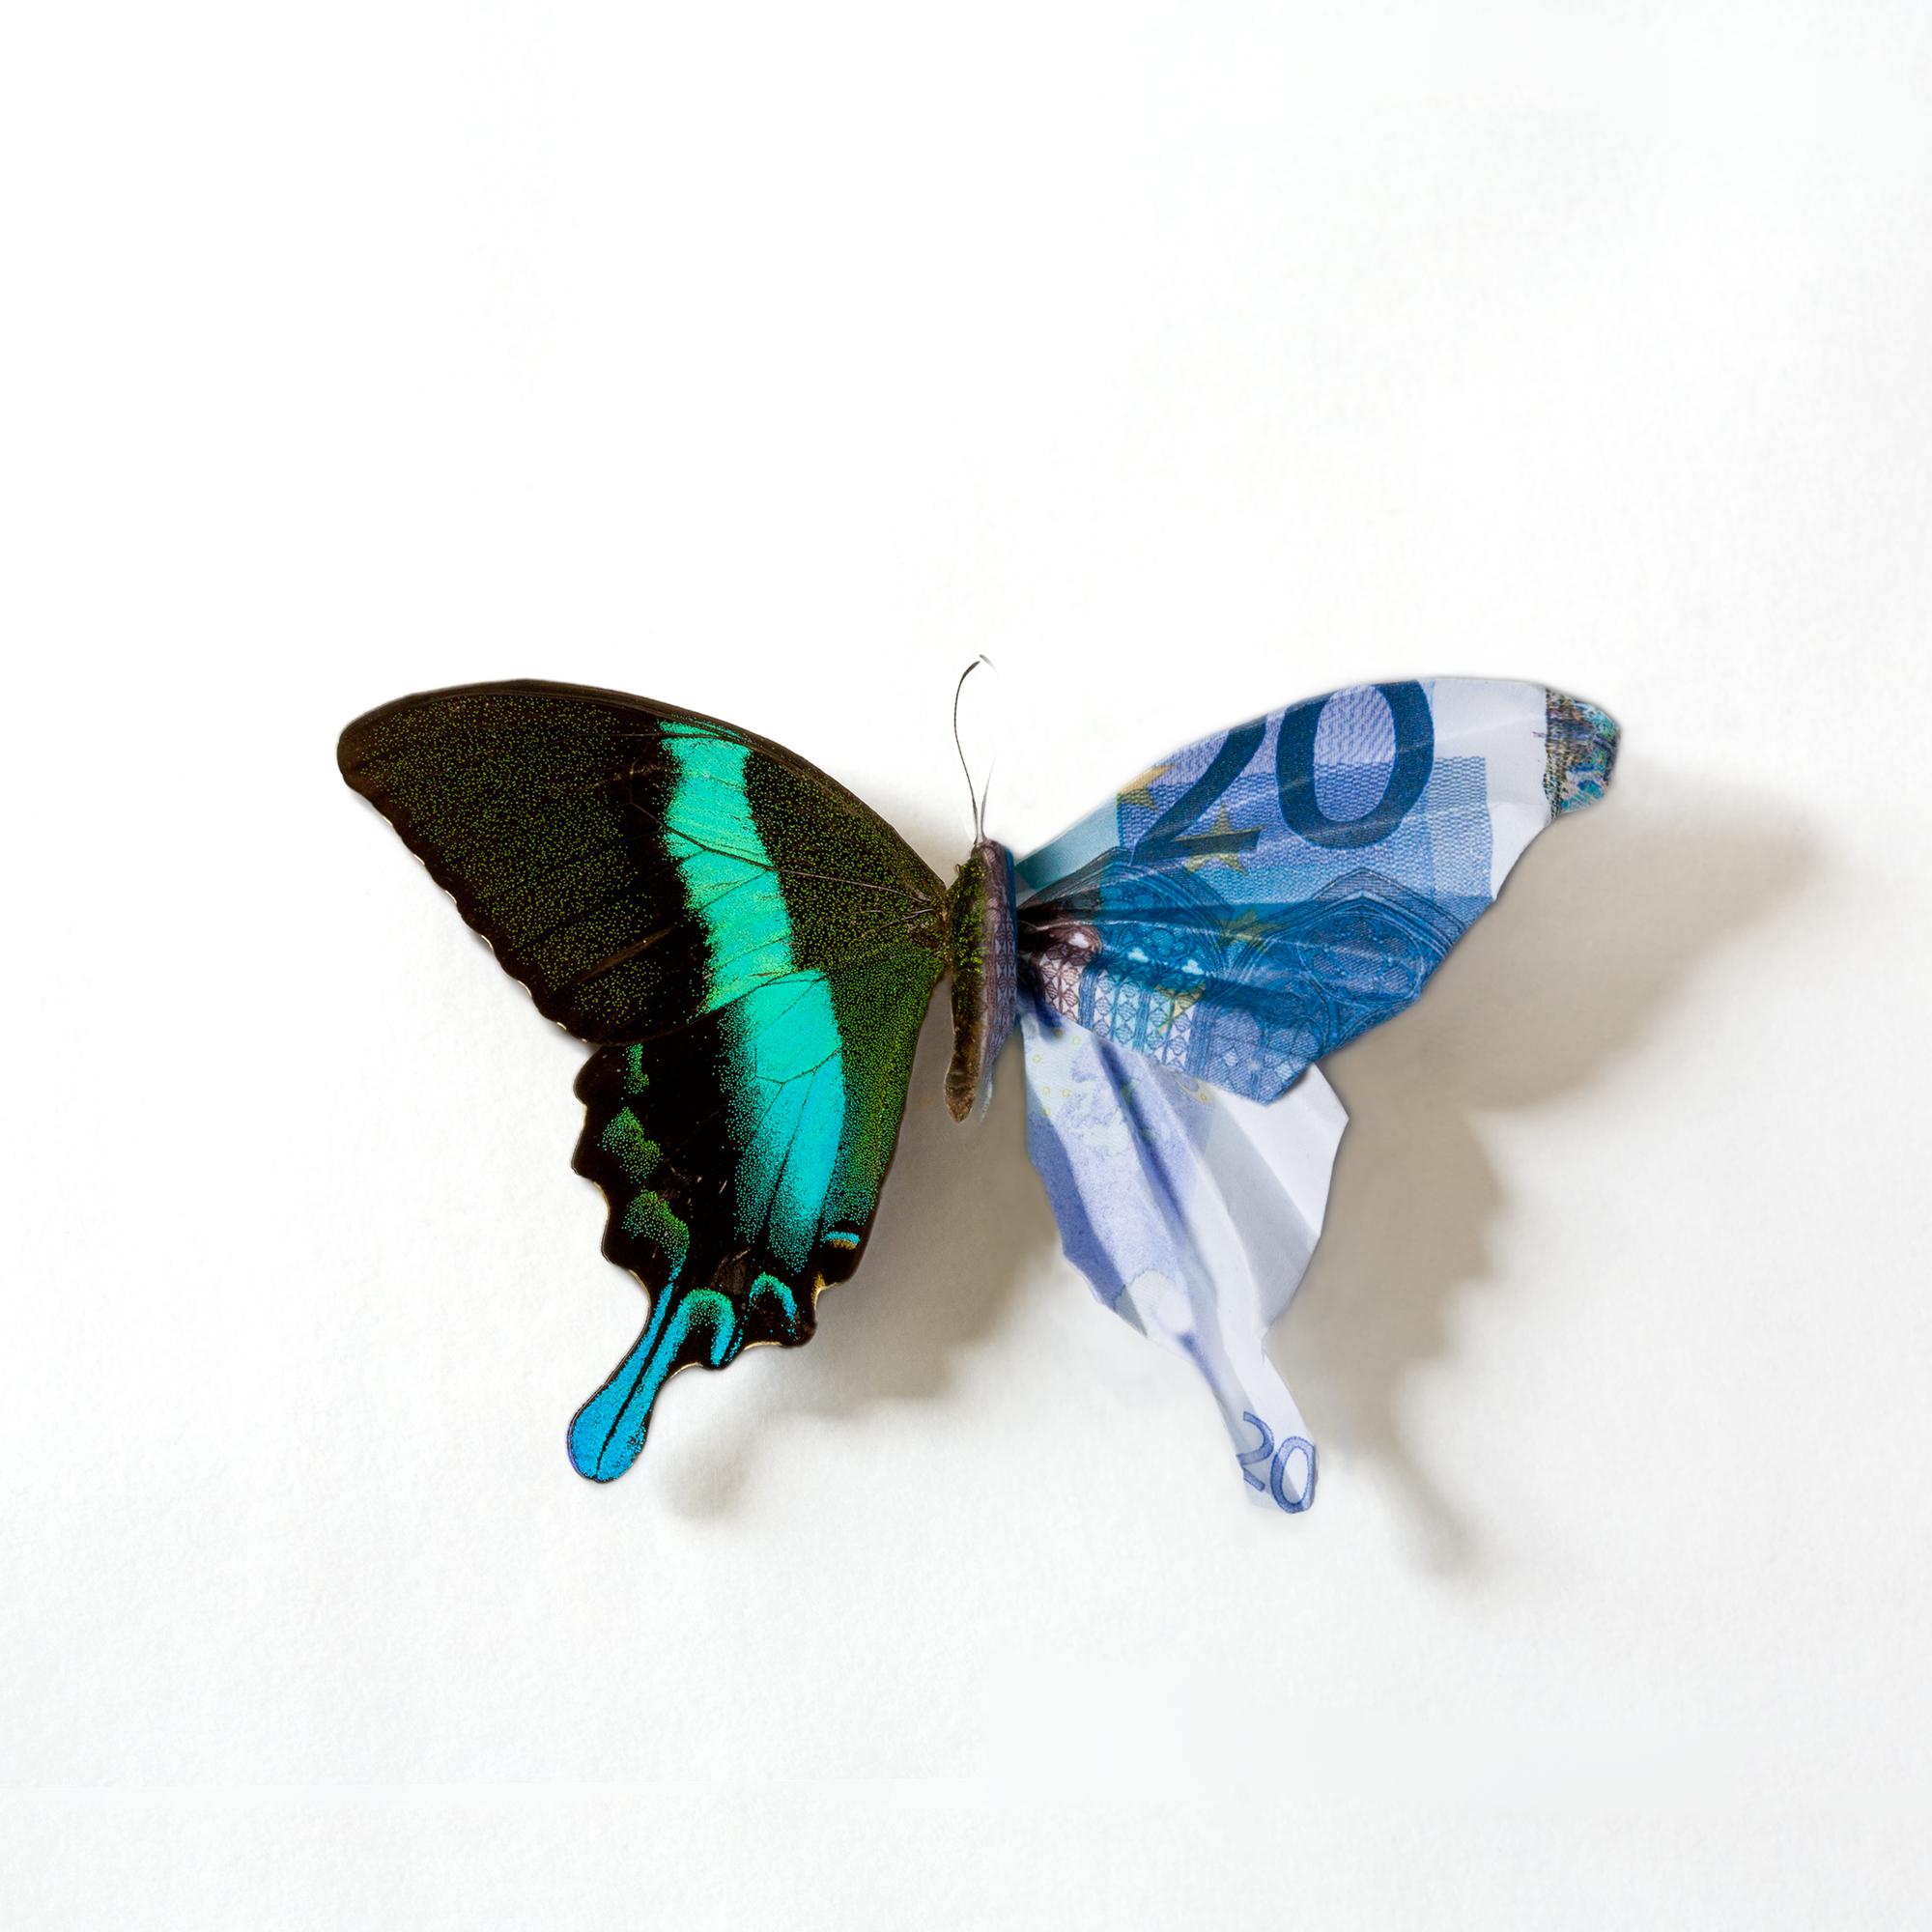 Anna Tas Figurative Photograph - "A Thing Of Beauty #4 (Papilio)" photography with lenticular lens, euro currency